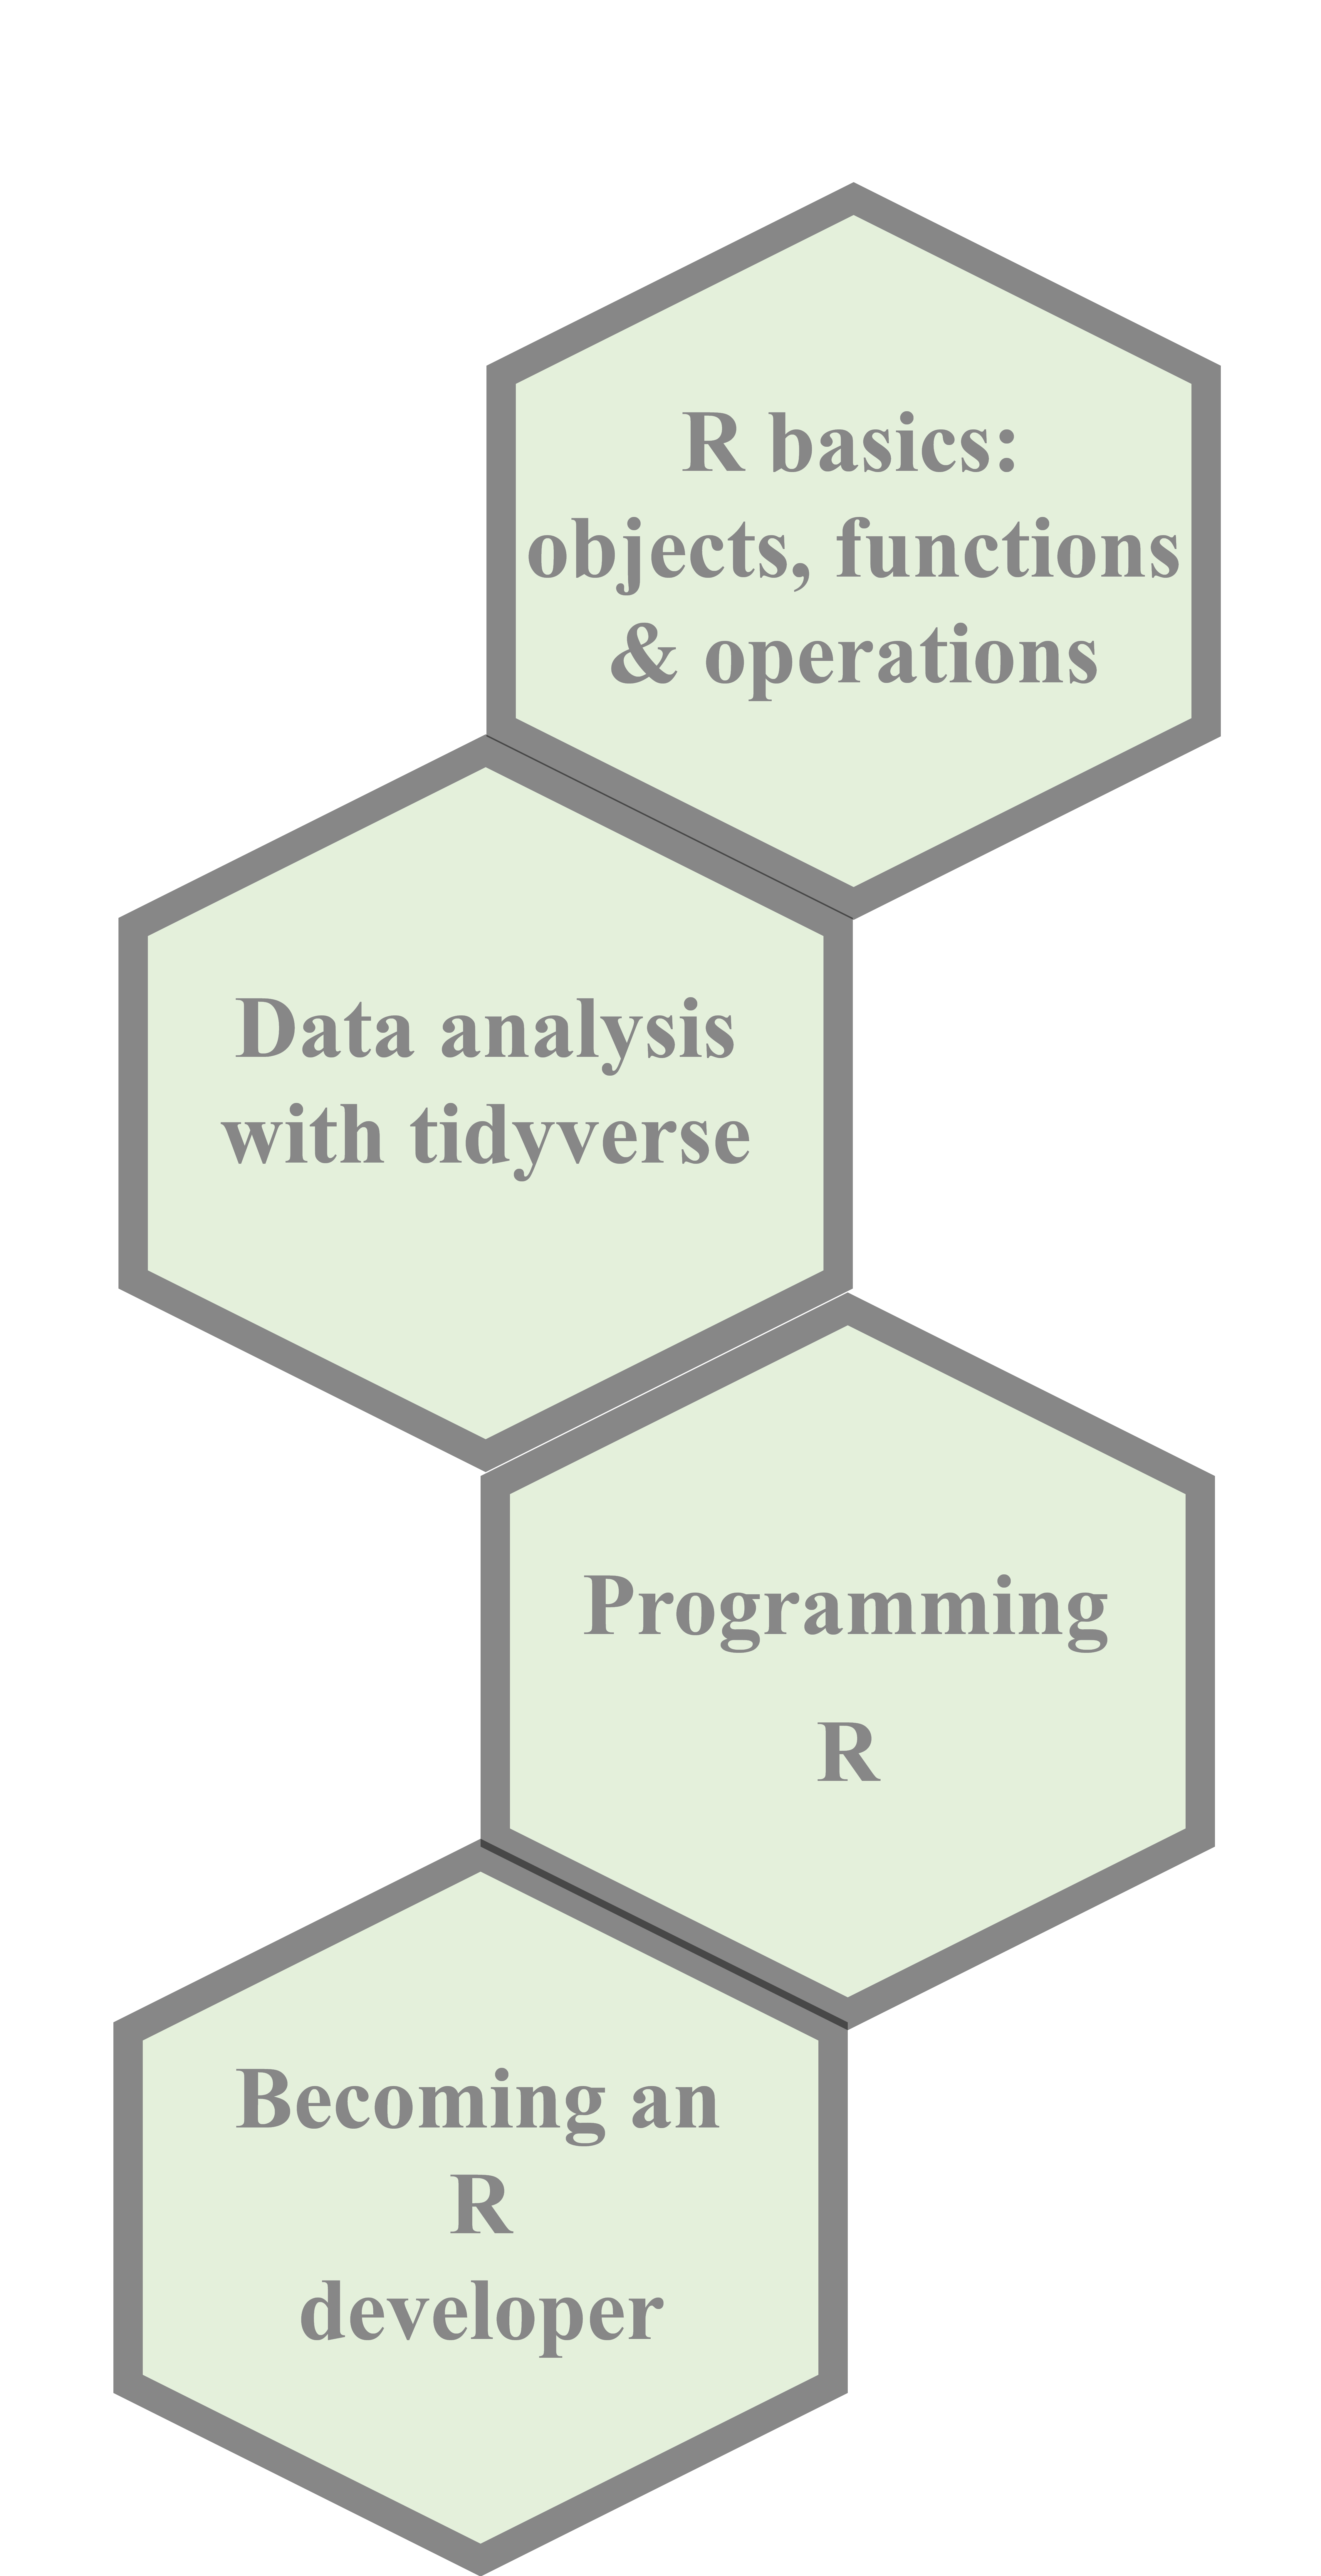 Introduction to R learning path from the basis of the syntax to professional development